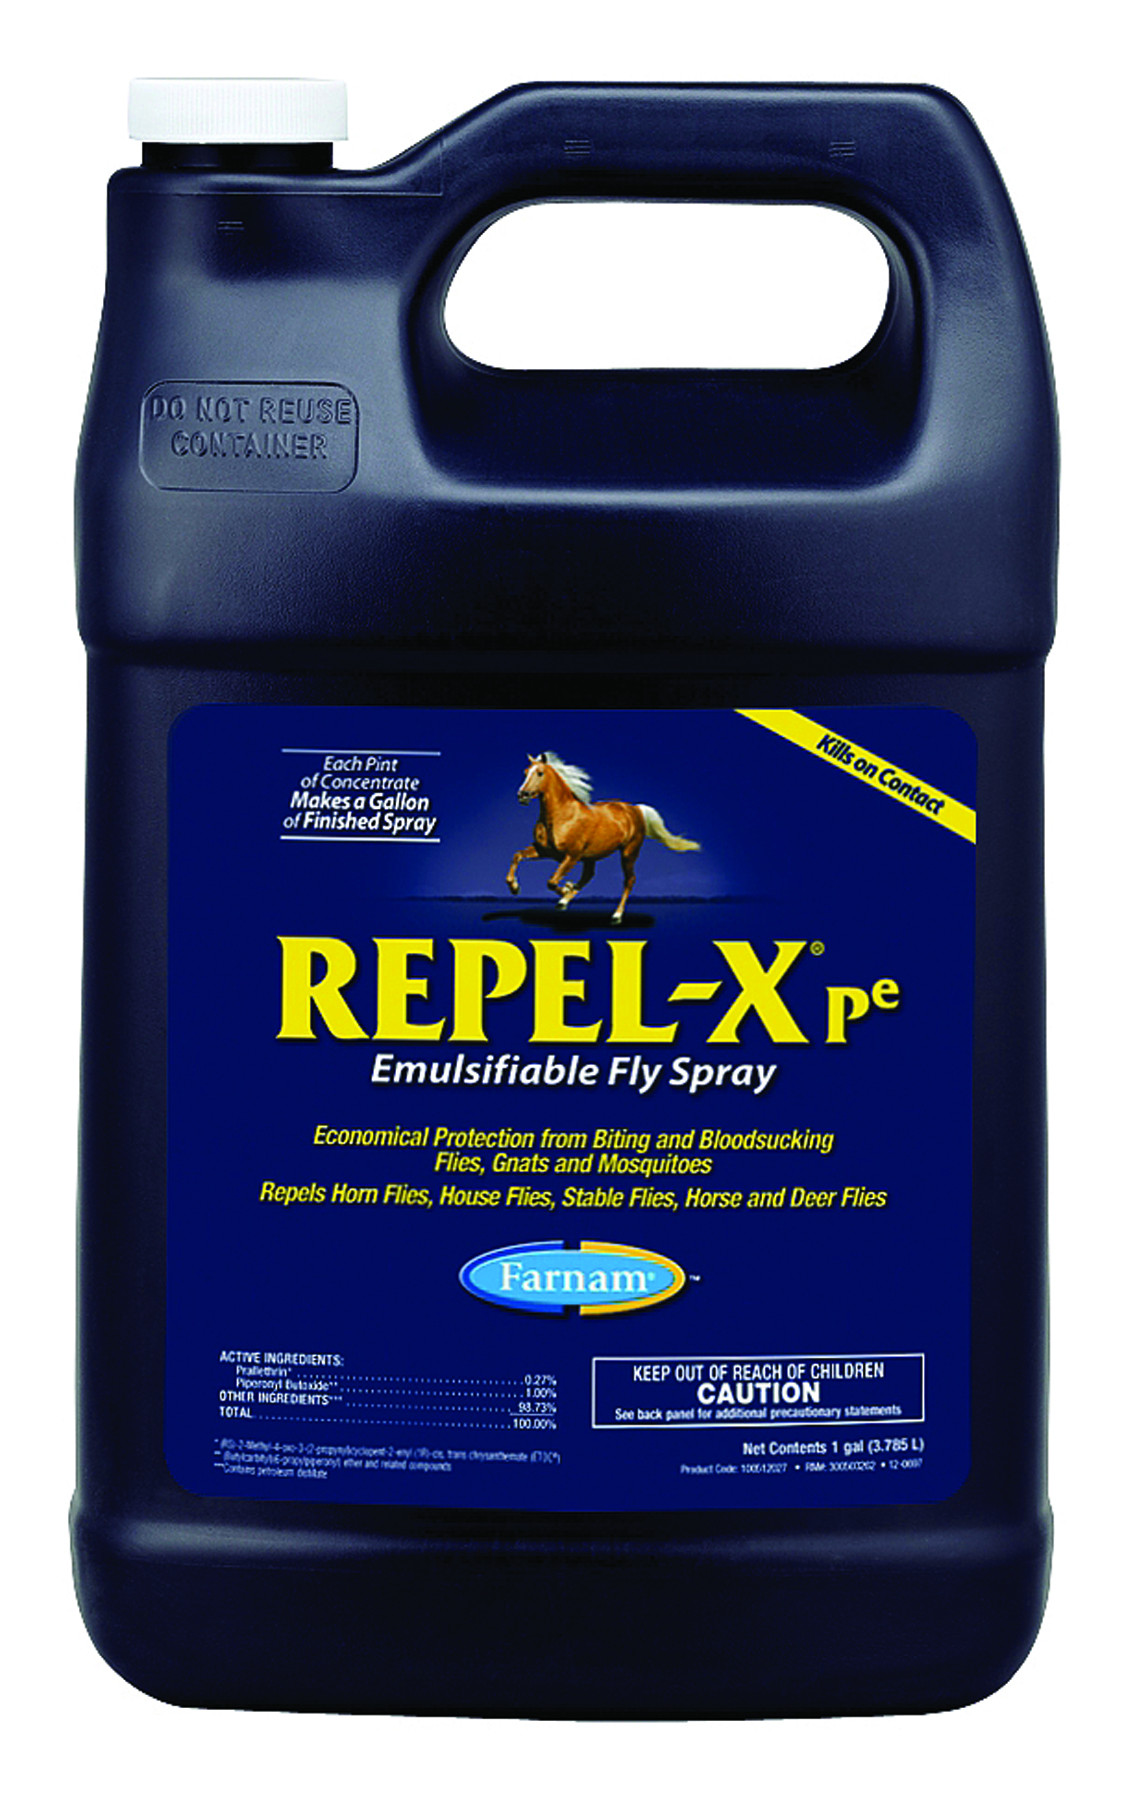 REPEL-X PE EMULSIFIABLE FLY SPRAY CONCENTRATE